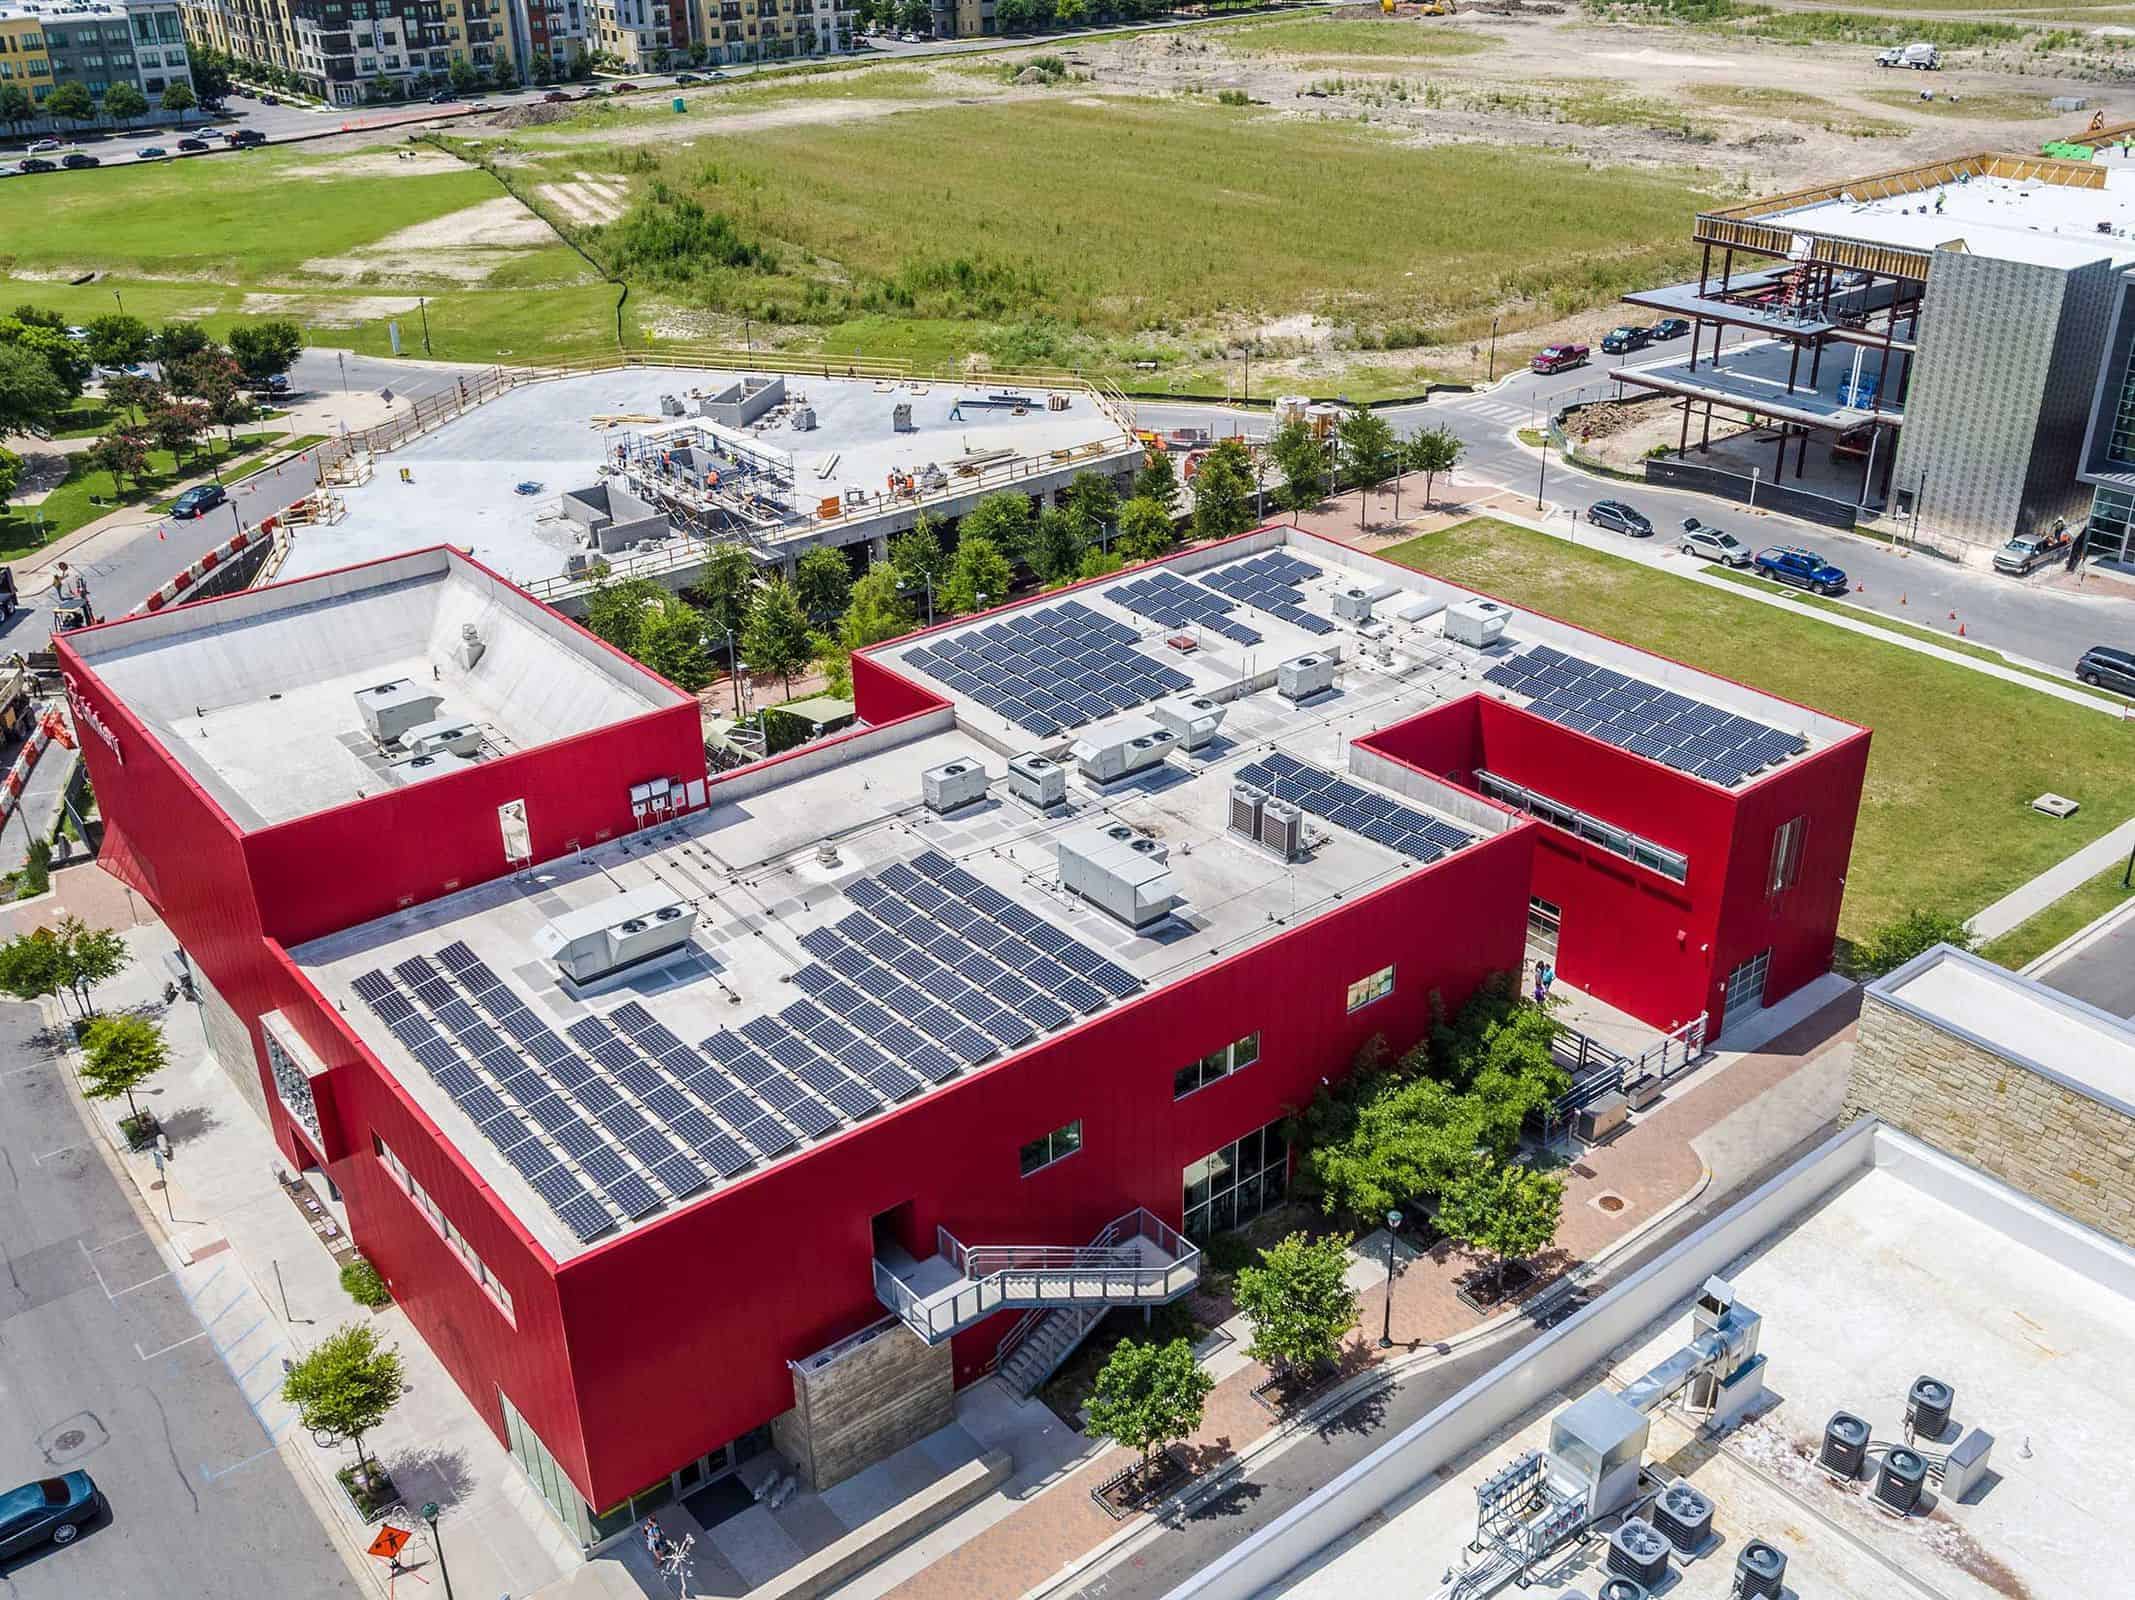 Aerial photo of solar panels on a large commercial building roof